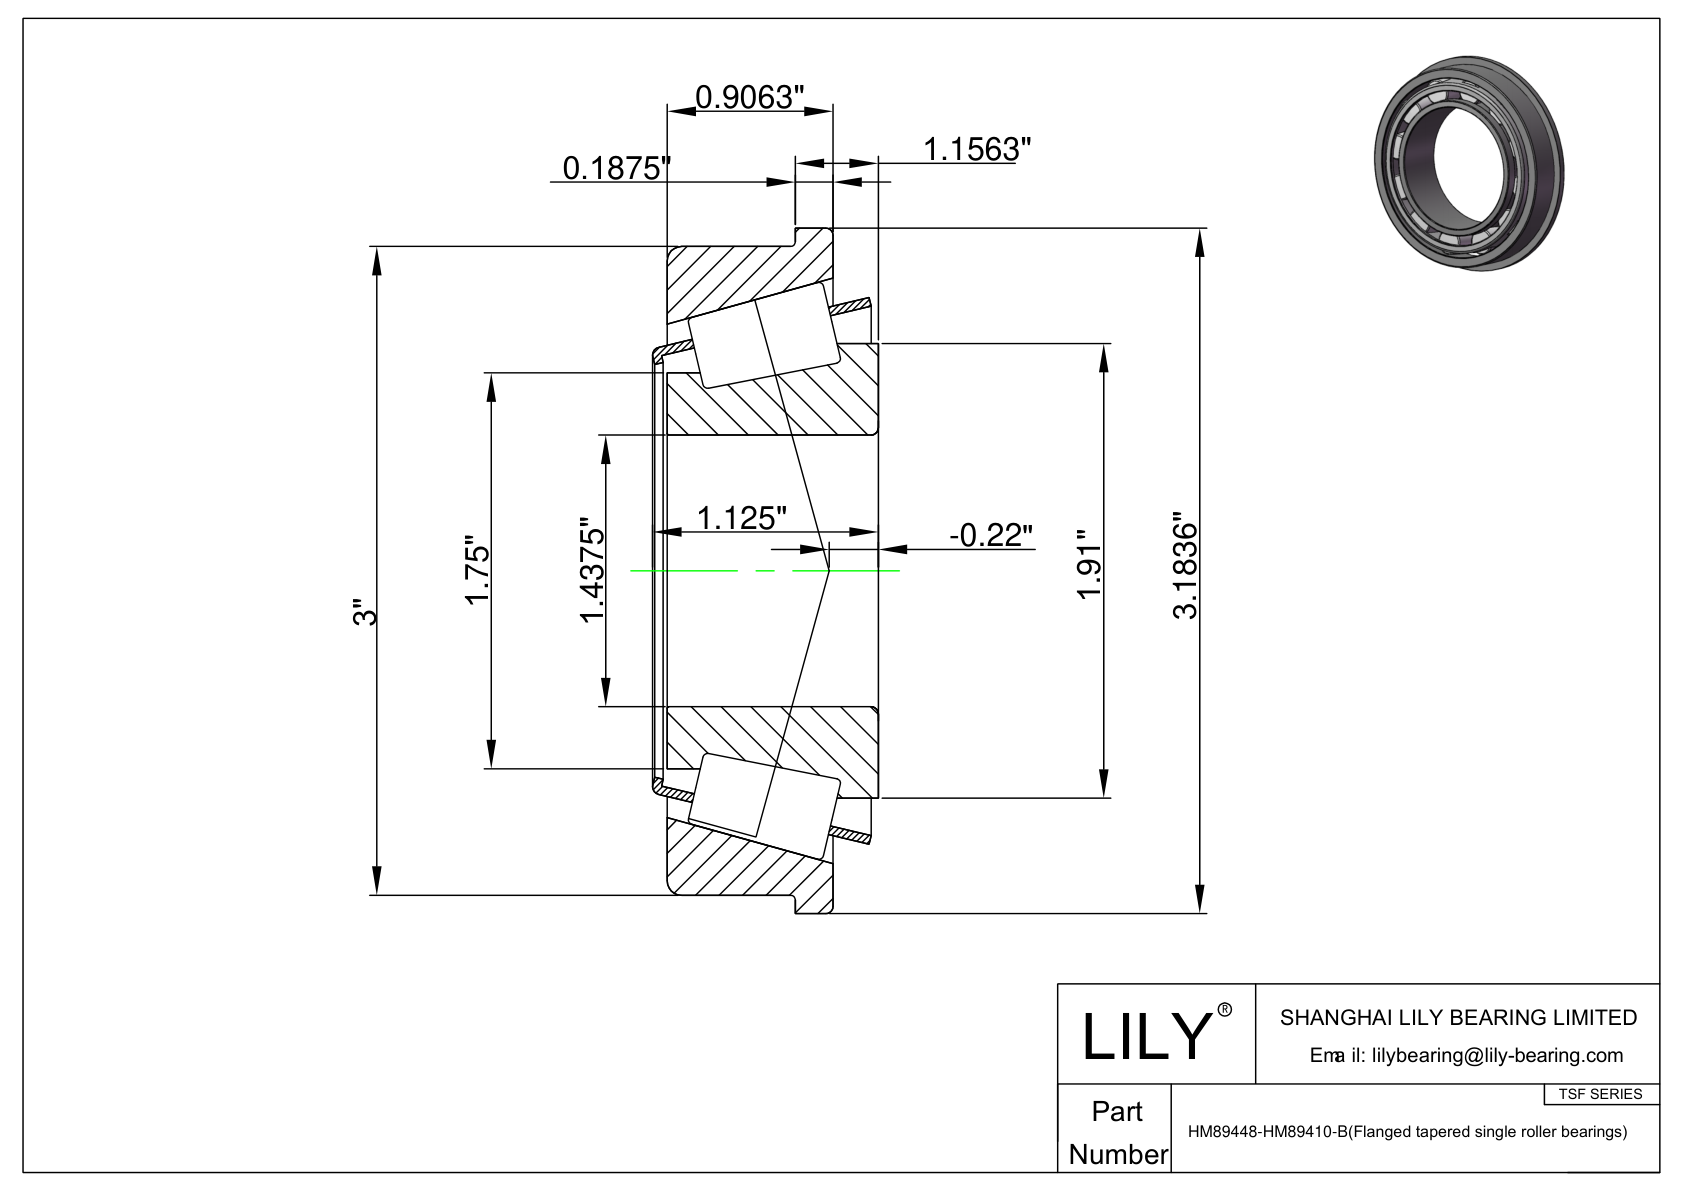 HM89448-HM89410-B TSF (Tapered Single Roller Bearings with Flange) (Imperial) cad drawing